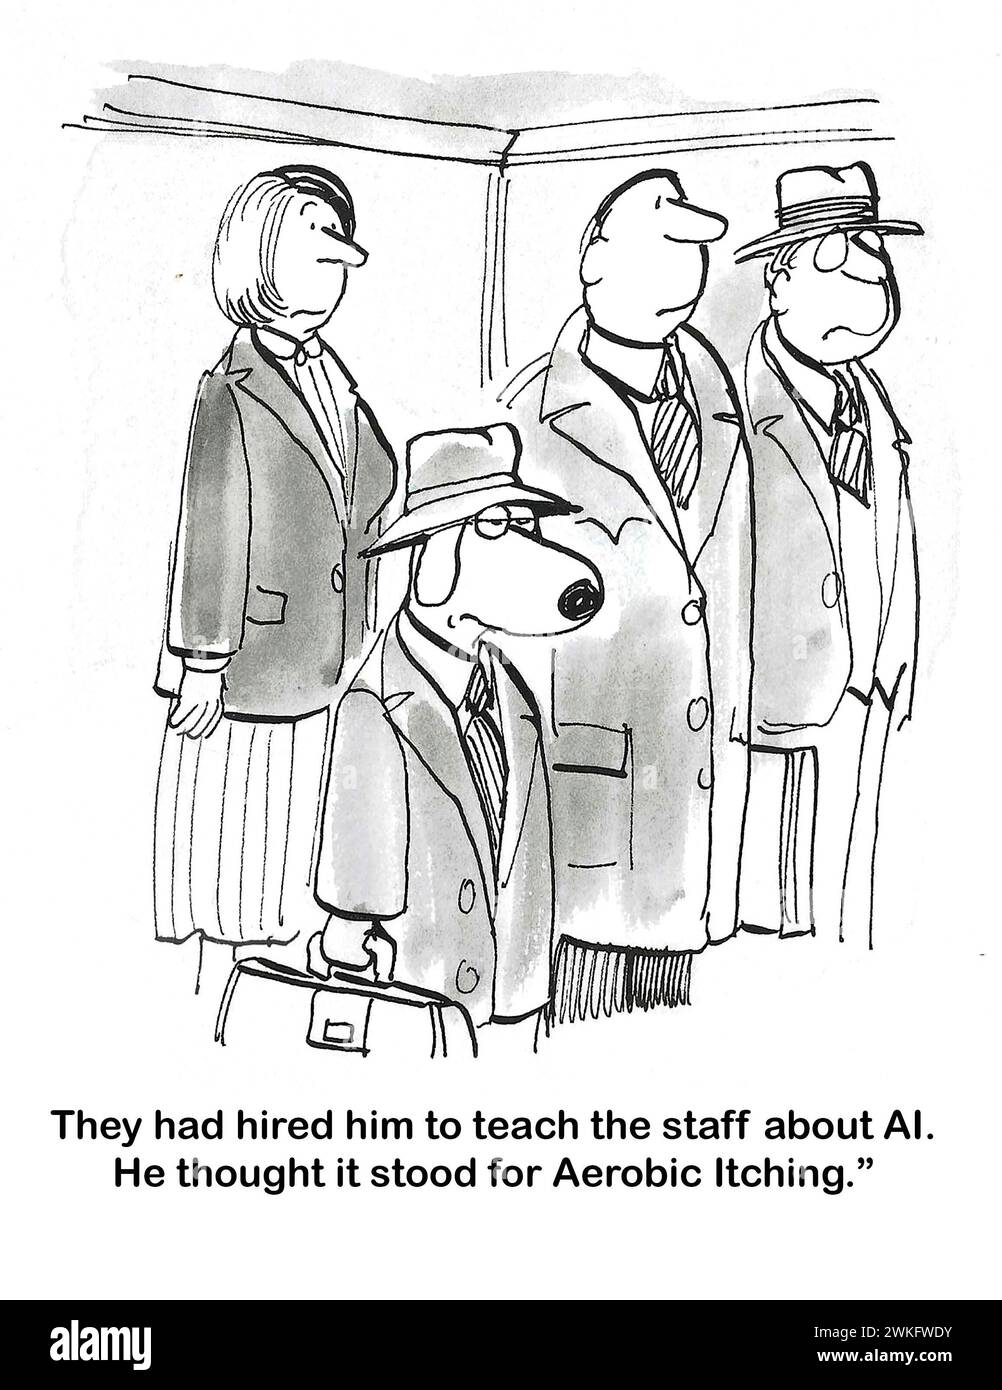 BW cartoon of a business dog in an elevator on his way to train employees on AI.  He thinks it means Aerobic Itching. Stock Photo